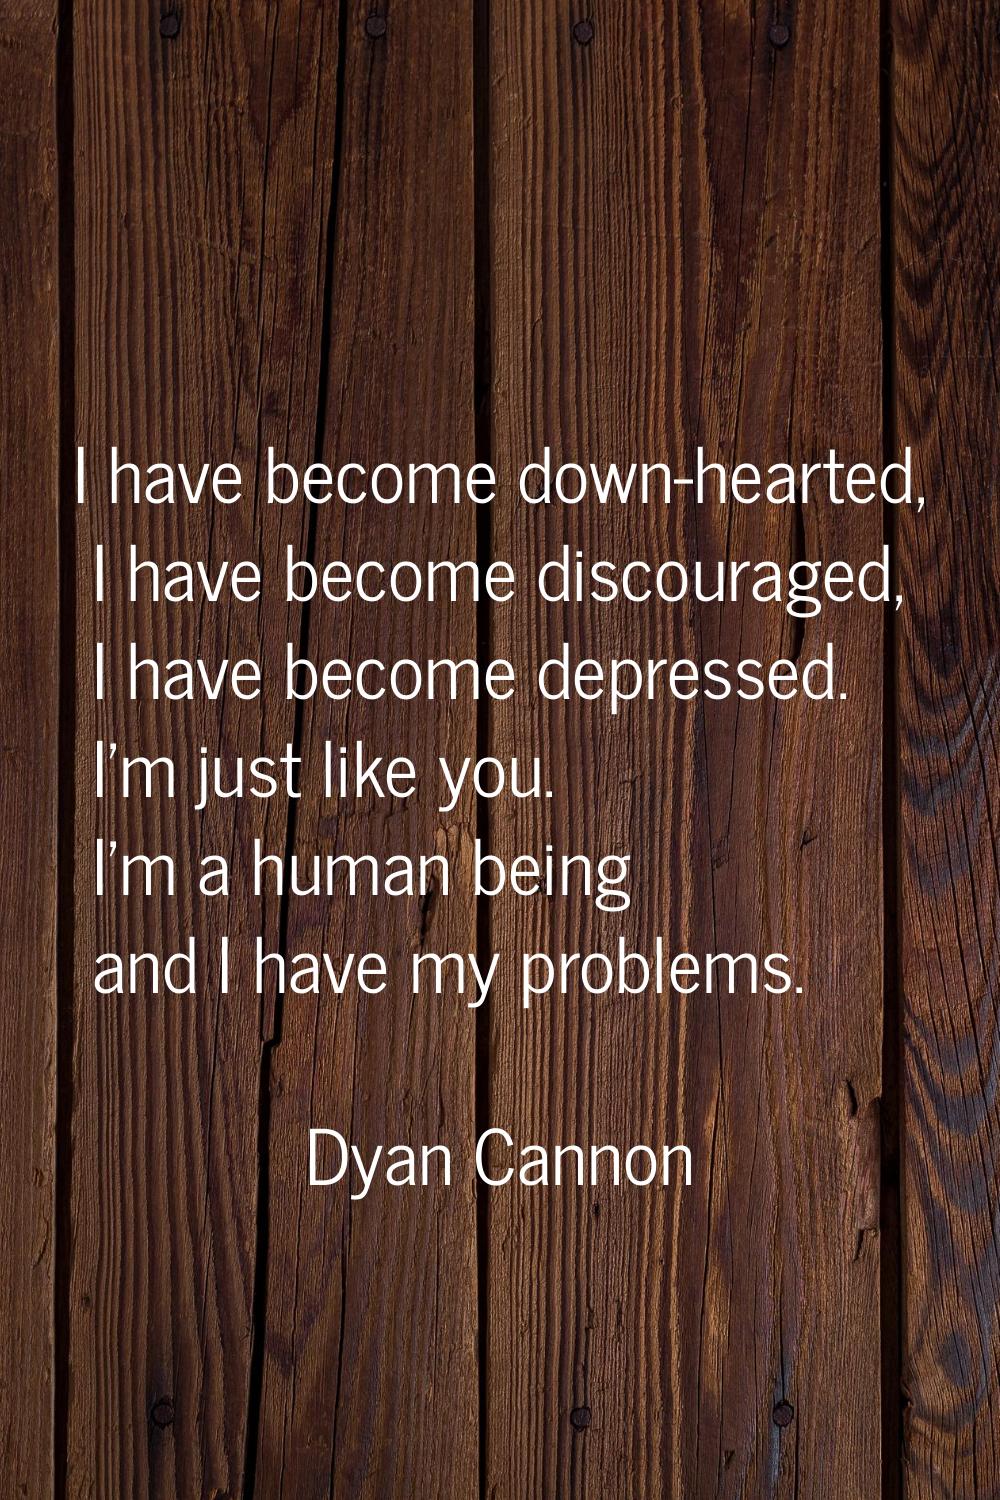 I have become down-hearted, I have become discouraged, I have become depressed. I'm just like you. 